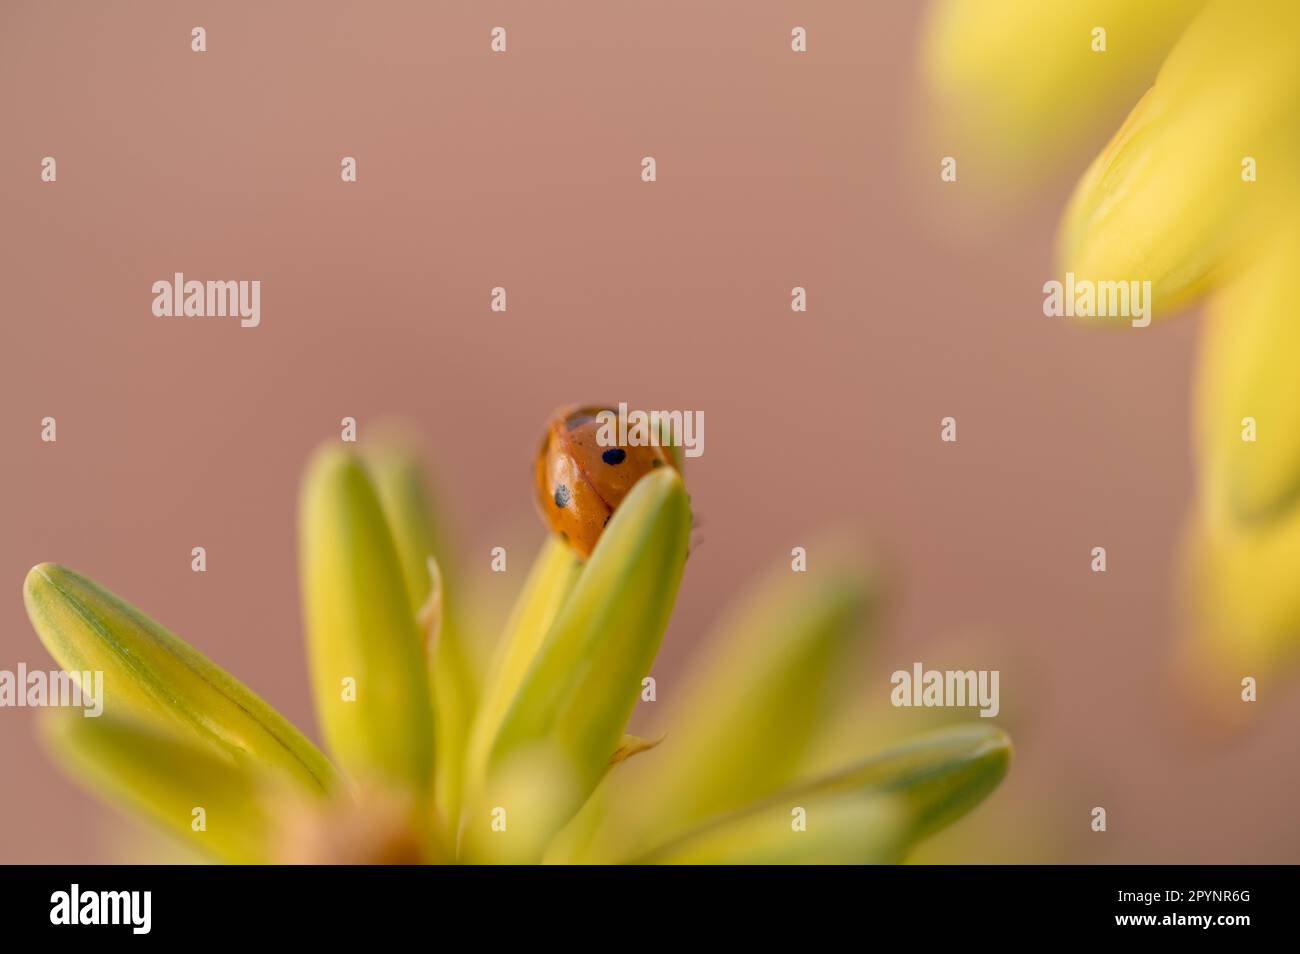 Detail of a ladybug among the yellow flowers of an aloe vera Stock Photo